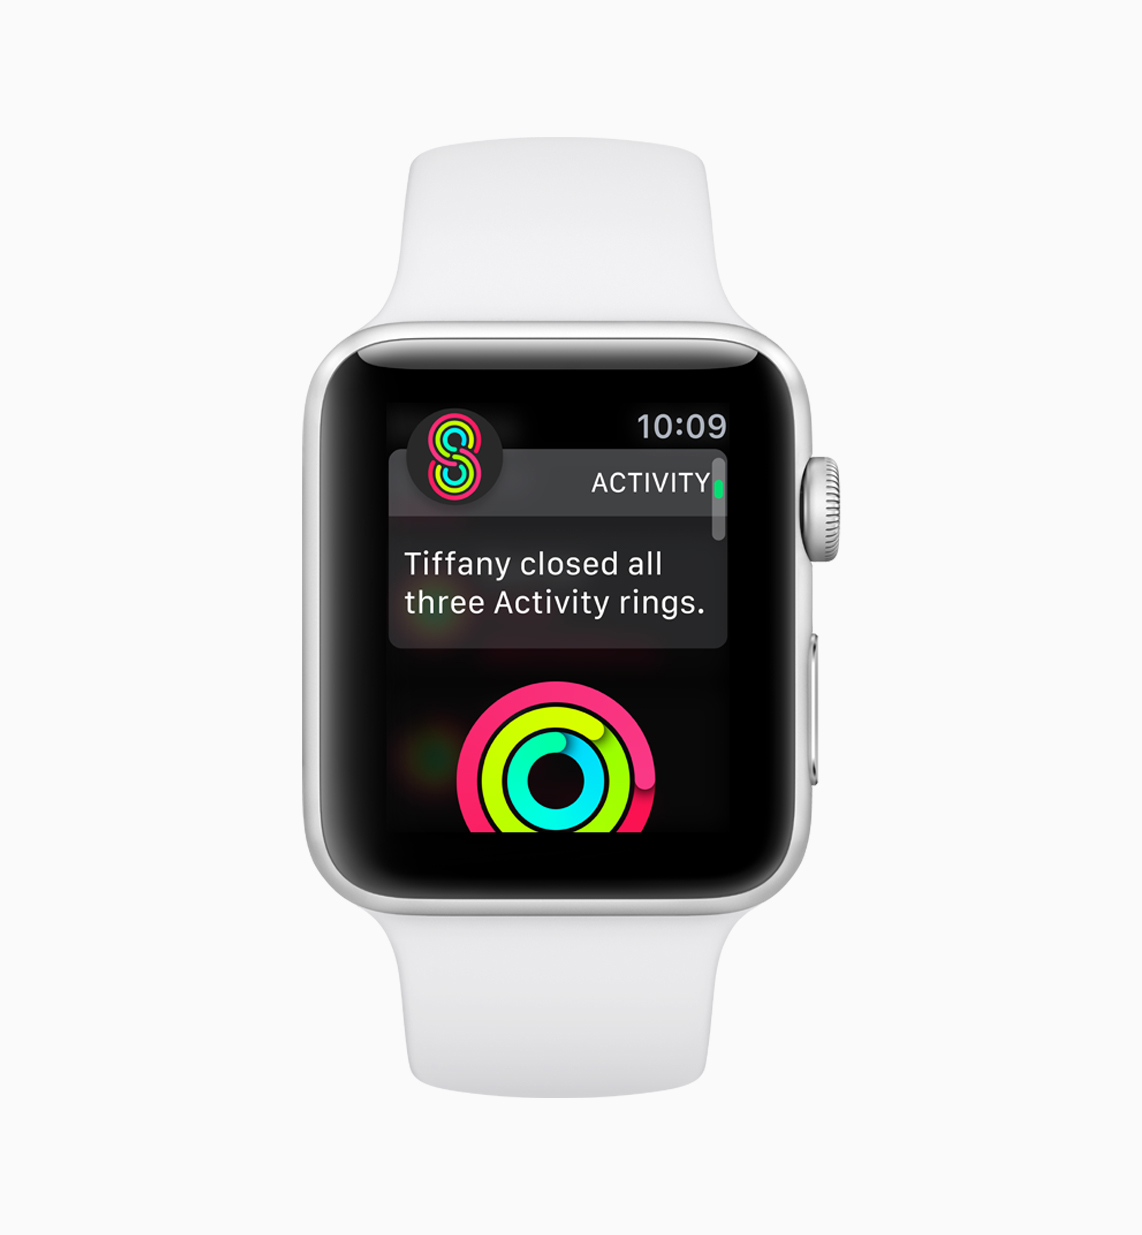 Apple Watch competitions